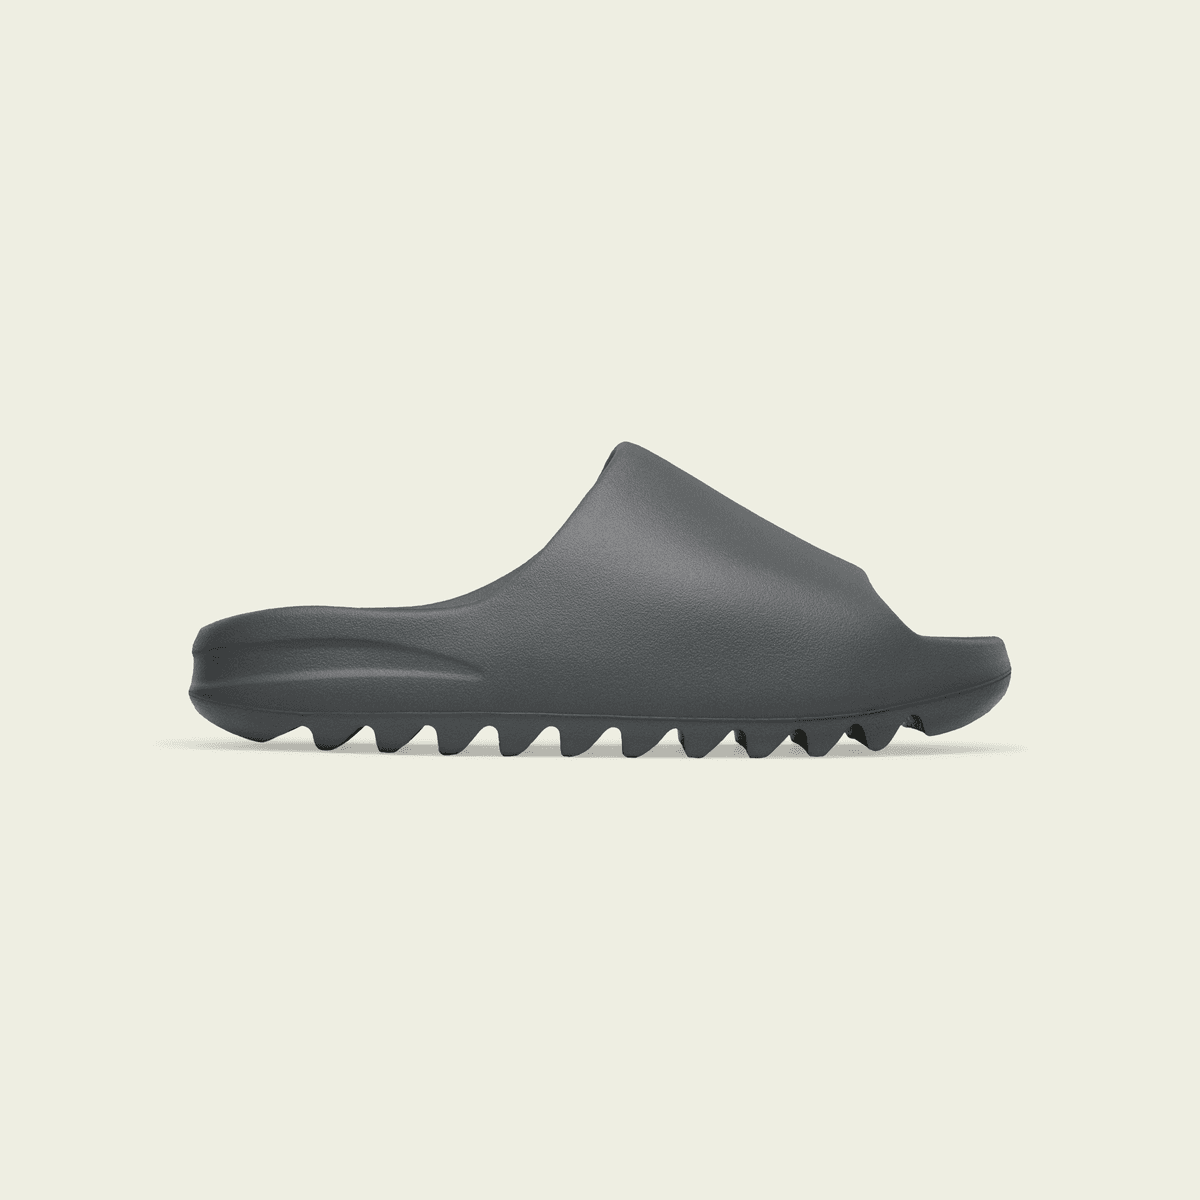 Adidas Yeezy Slide “Slate Grey” Gears Up For August Release